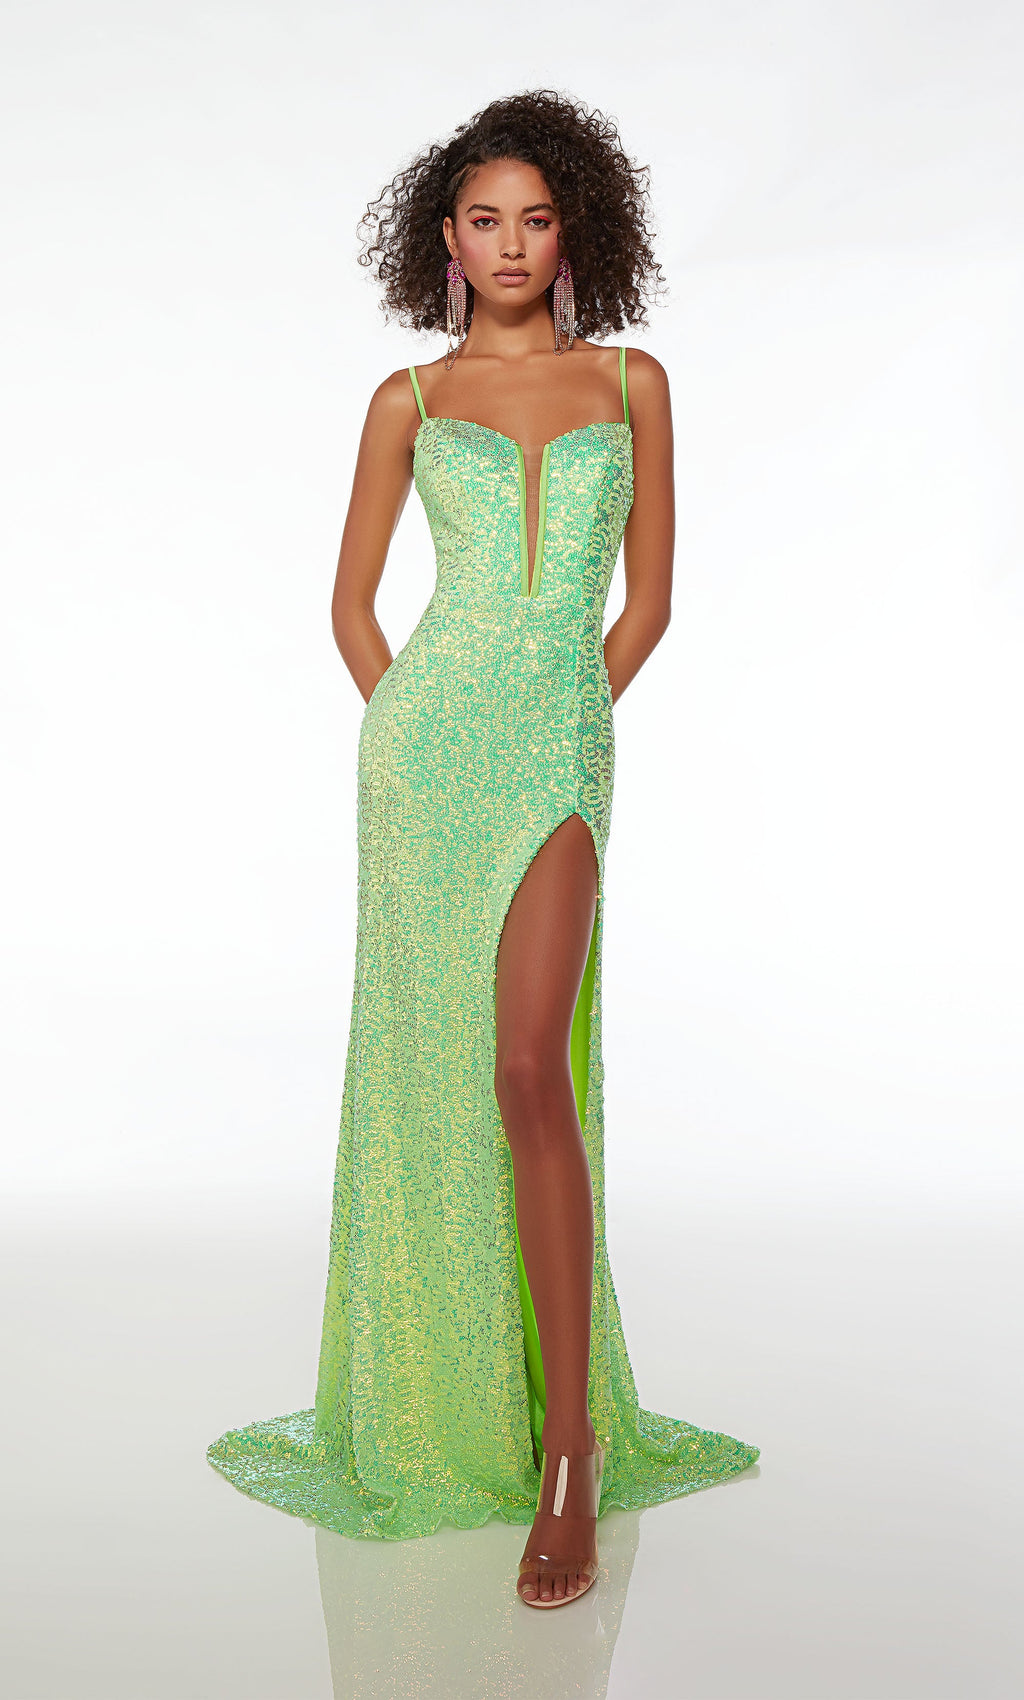 Dazzle all night long at your prom wearing this scintillating Alyce Paris long dress style 61556 completely embellished in shiny sequins. This shimmering gown showcases a plunging V neckline with illusion insert, adjustable spaghetti straps and cut out strappy low back. The long slim skirt has a high front side slit and sweep train.